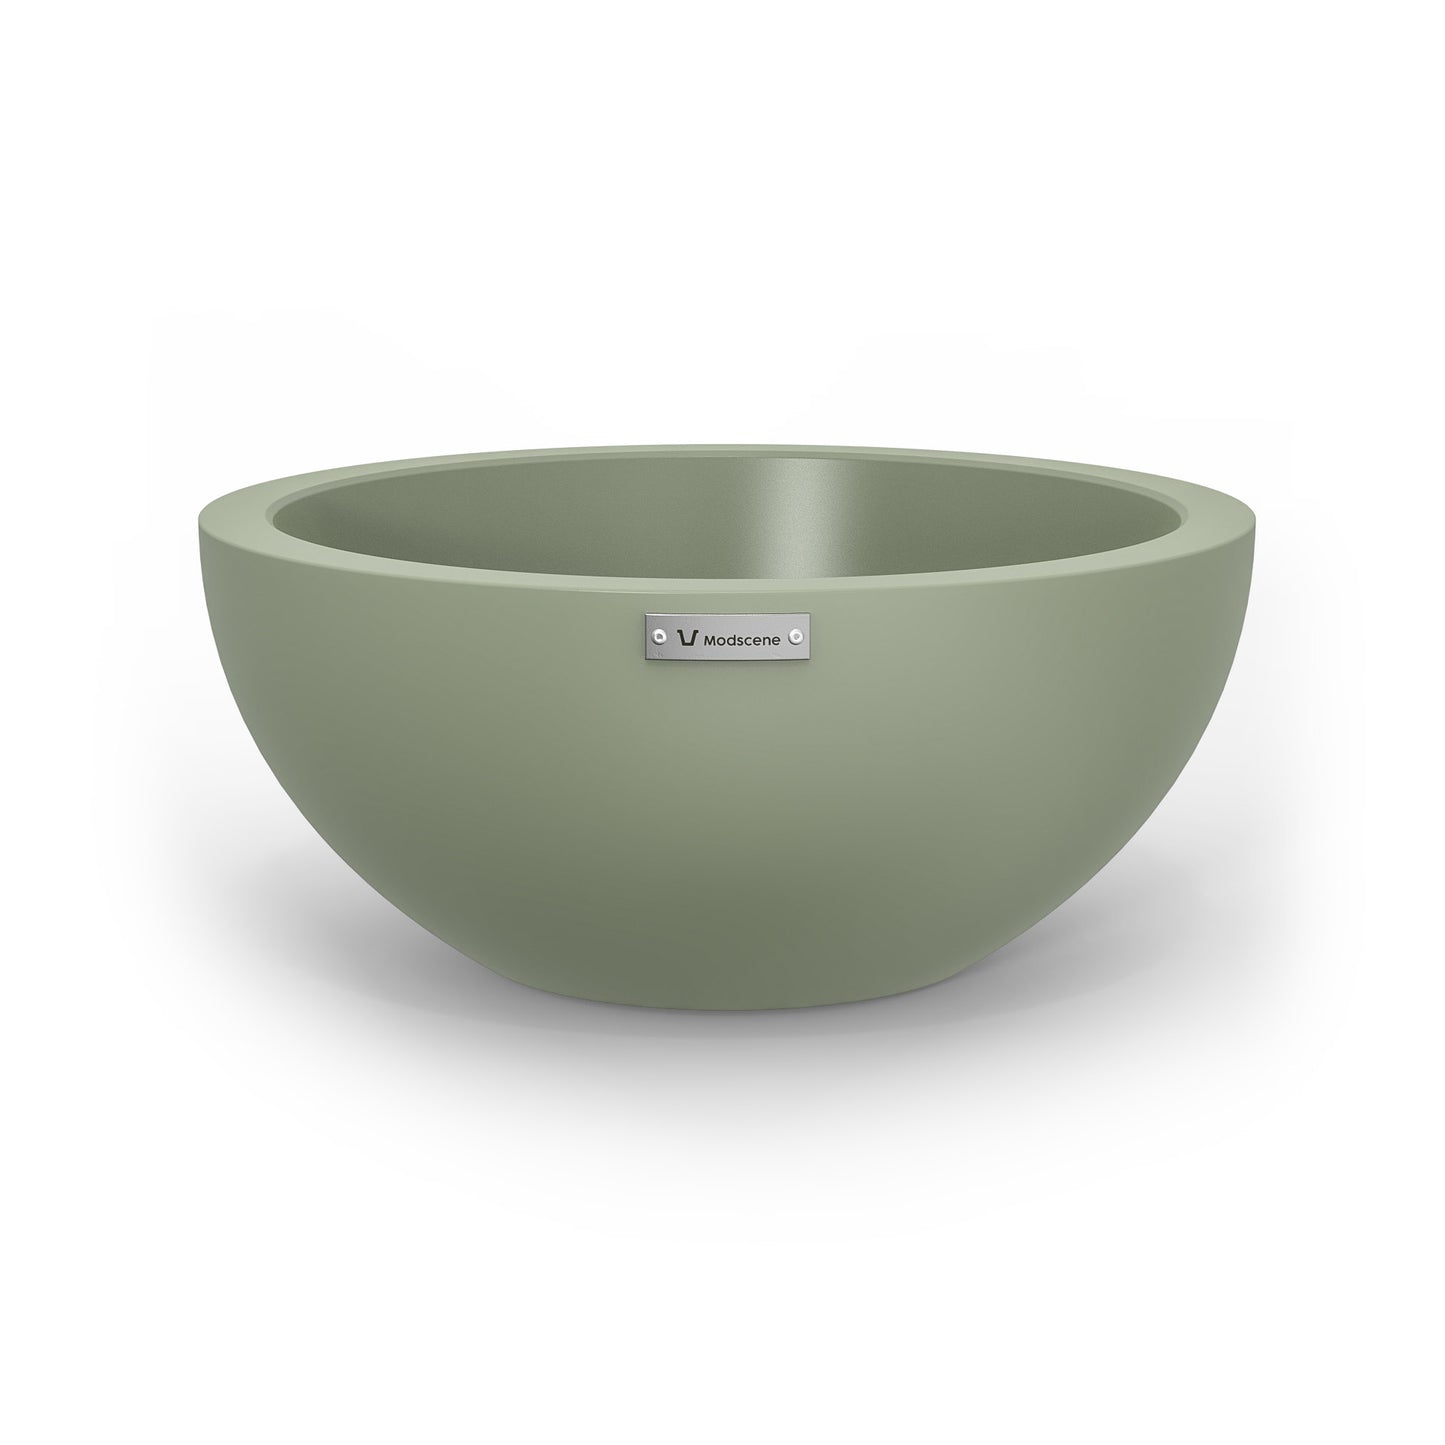 A small planter bowl in a pastel green colour made by Modscene.